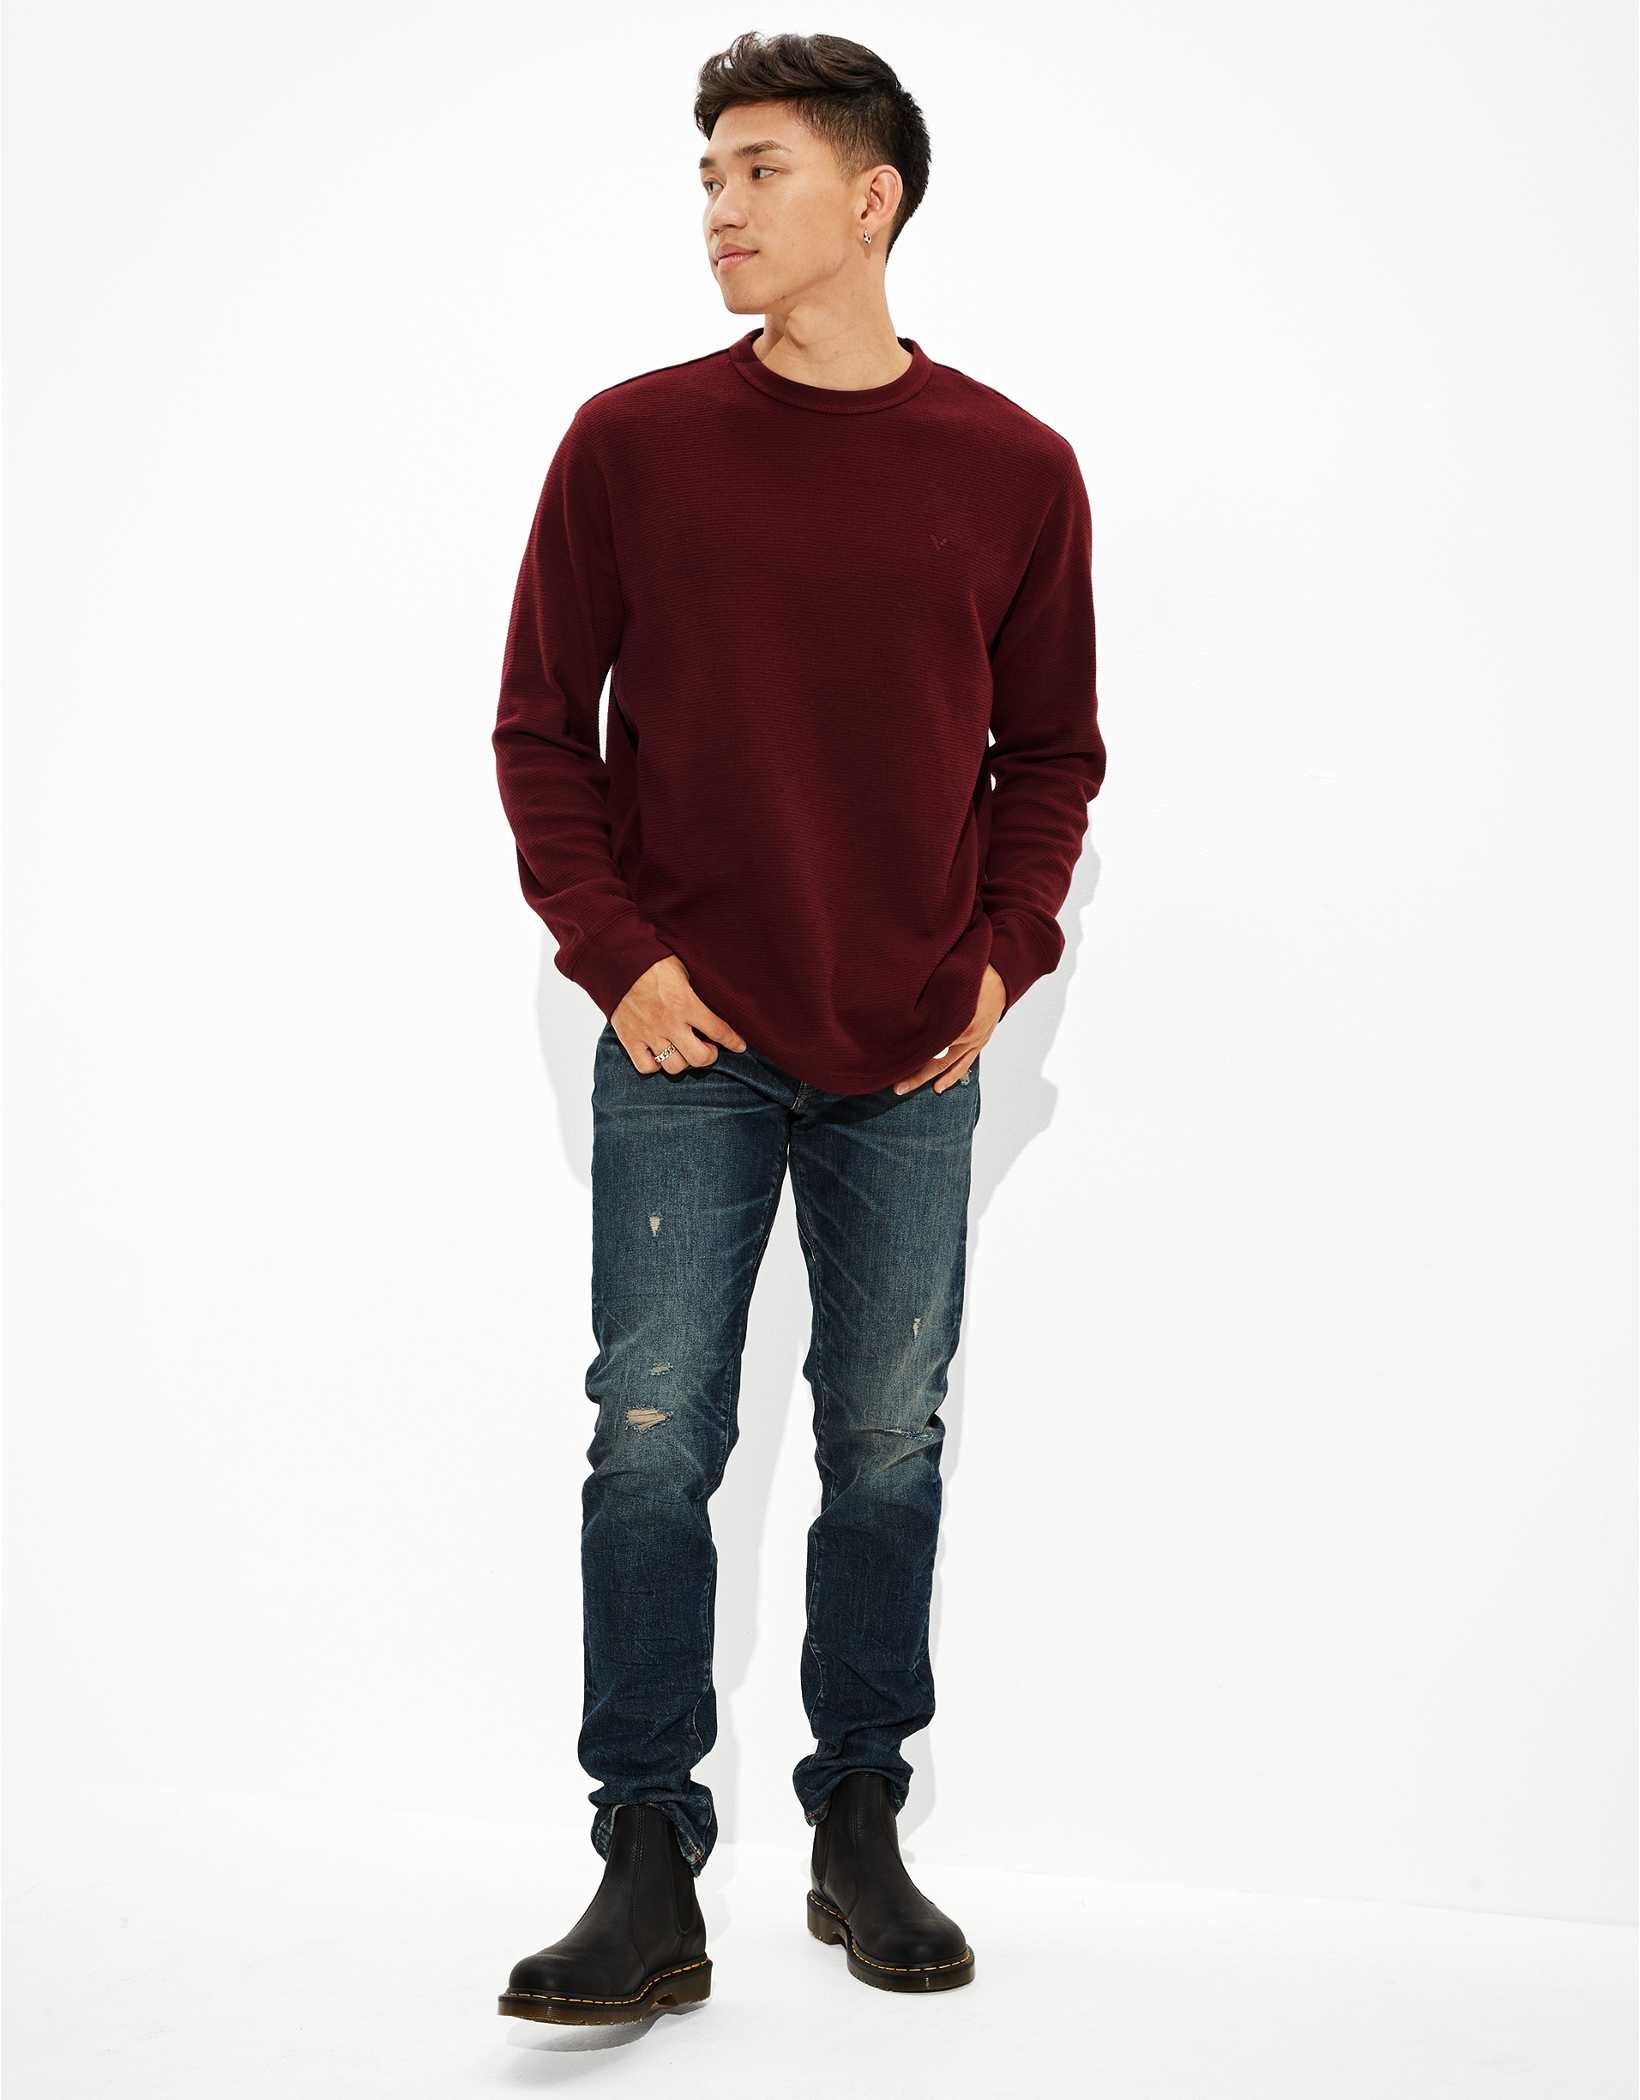 A model wearing the red long sleeve with jeans